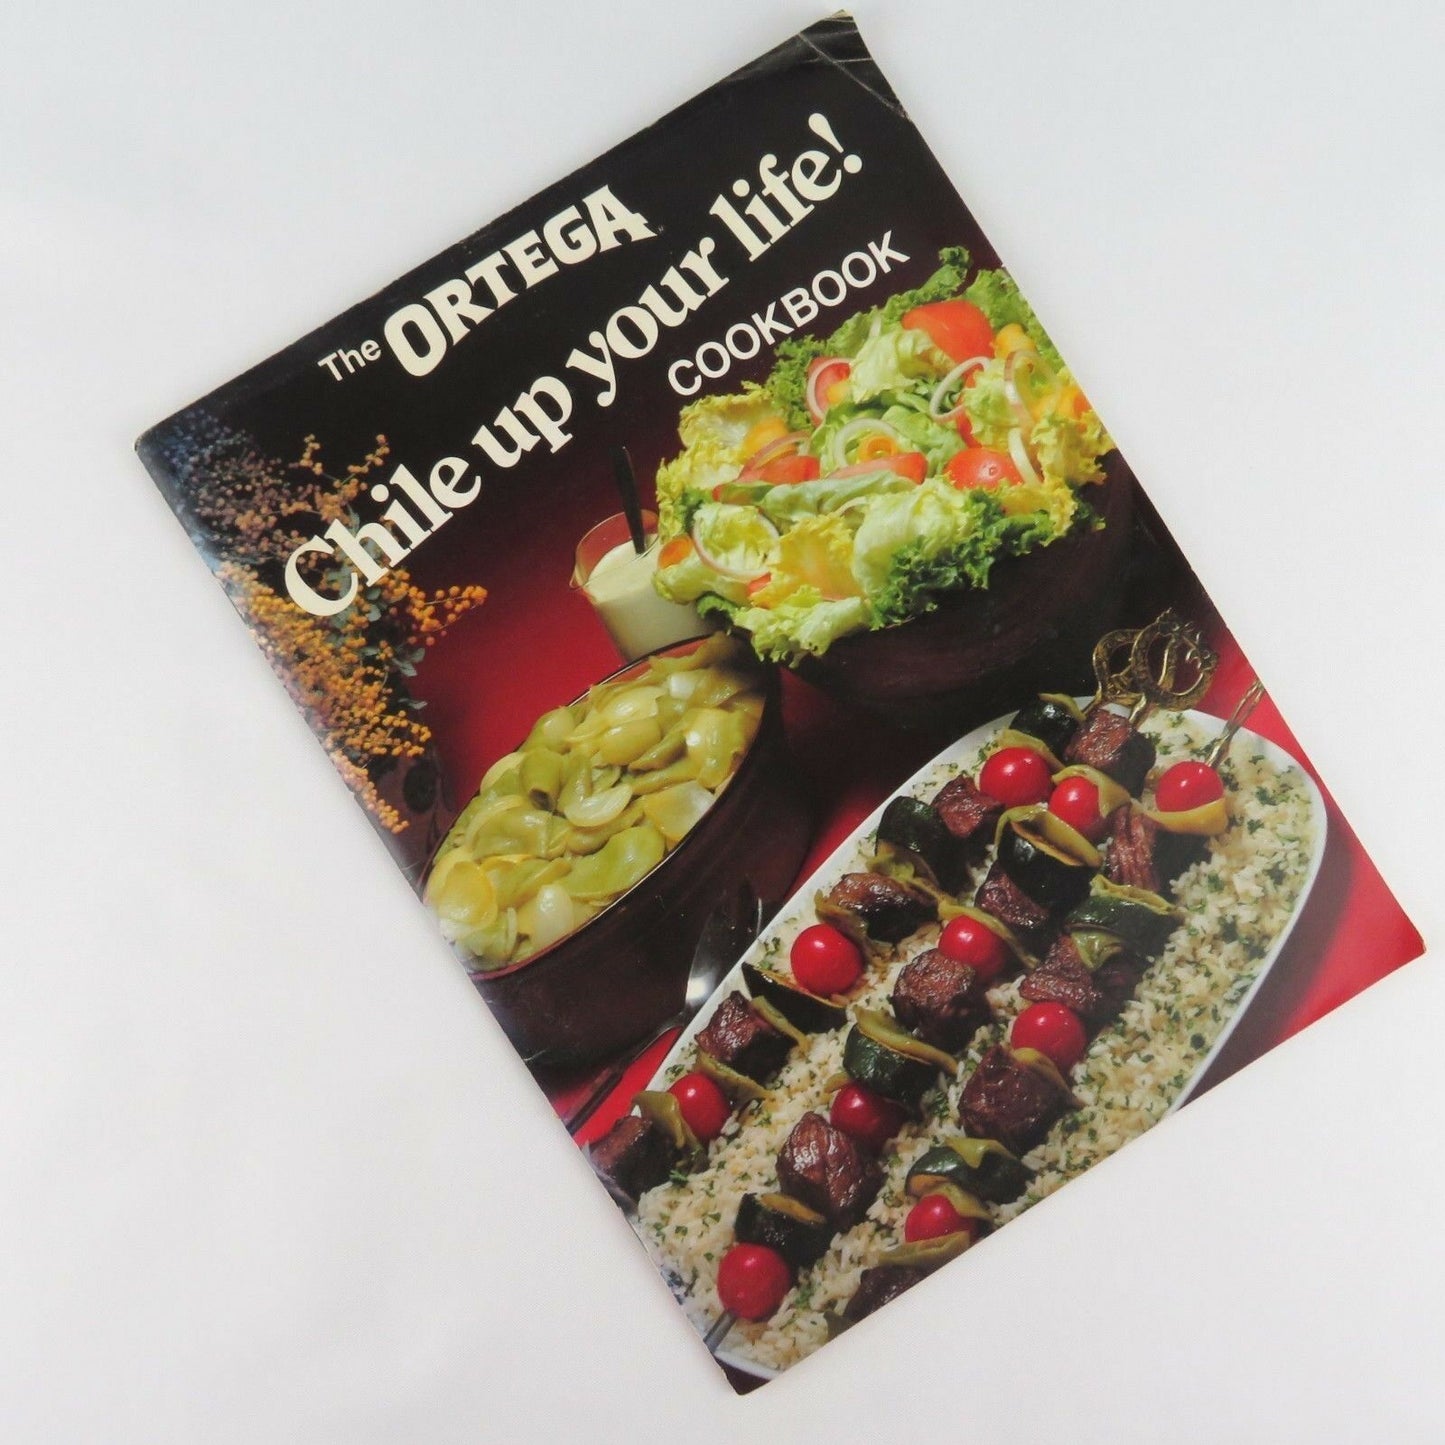 Vintage Ortega Brand Cookbook Chile Up Your Life Heublein Food 1981 Mexican - At Grandma's Table